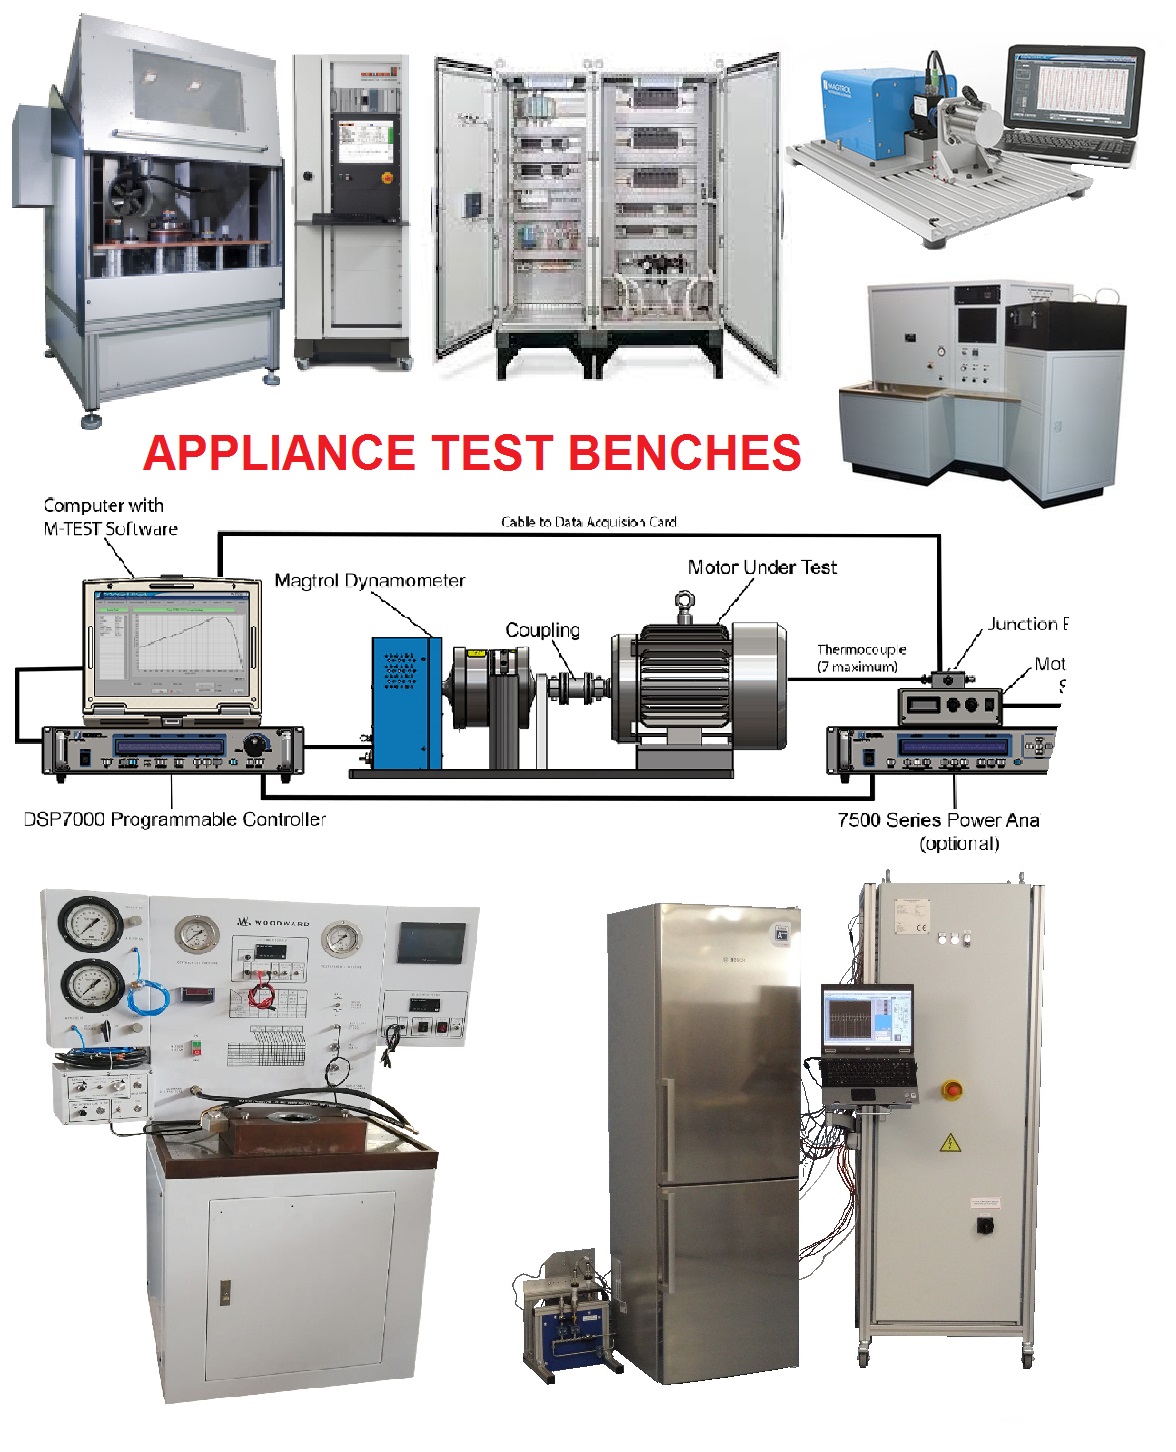 Appliance Test Benches